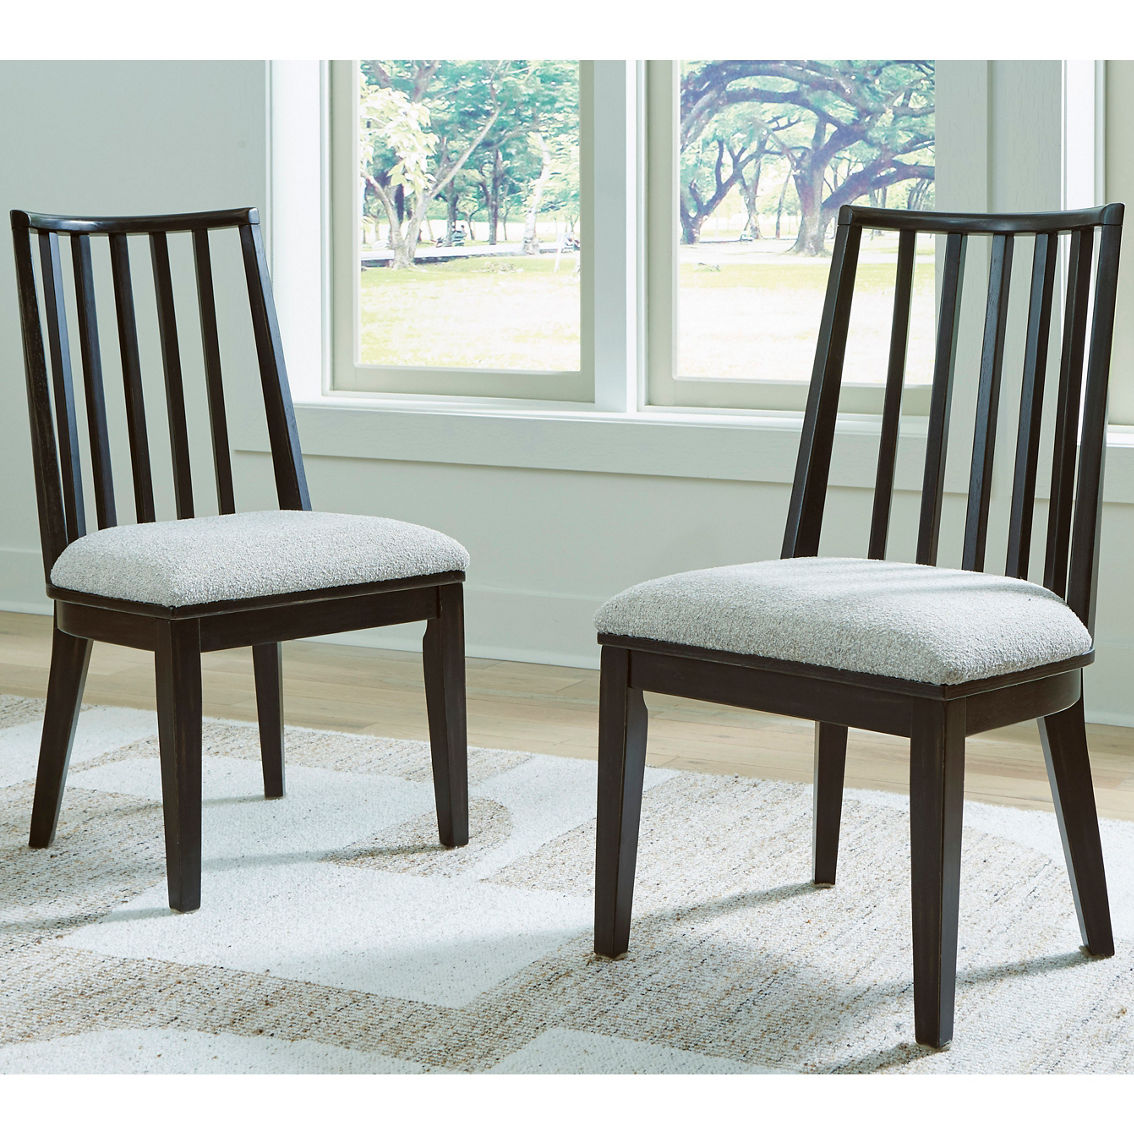 Signature Design by Ashley Galliden 7 pc. Dining Set: Table, 6 Side Chairs - Image 3 of 6